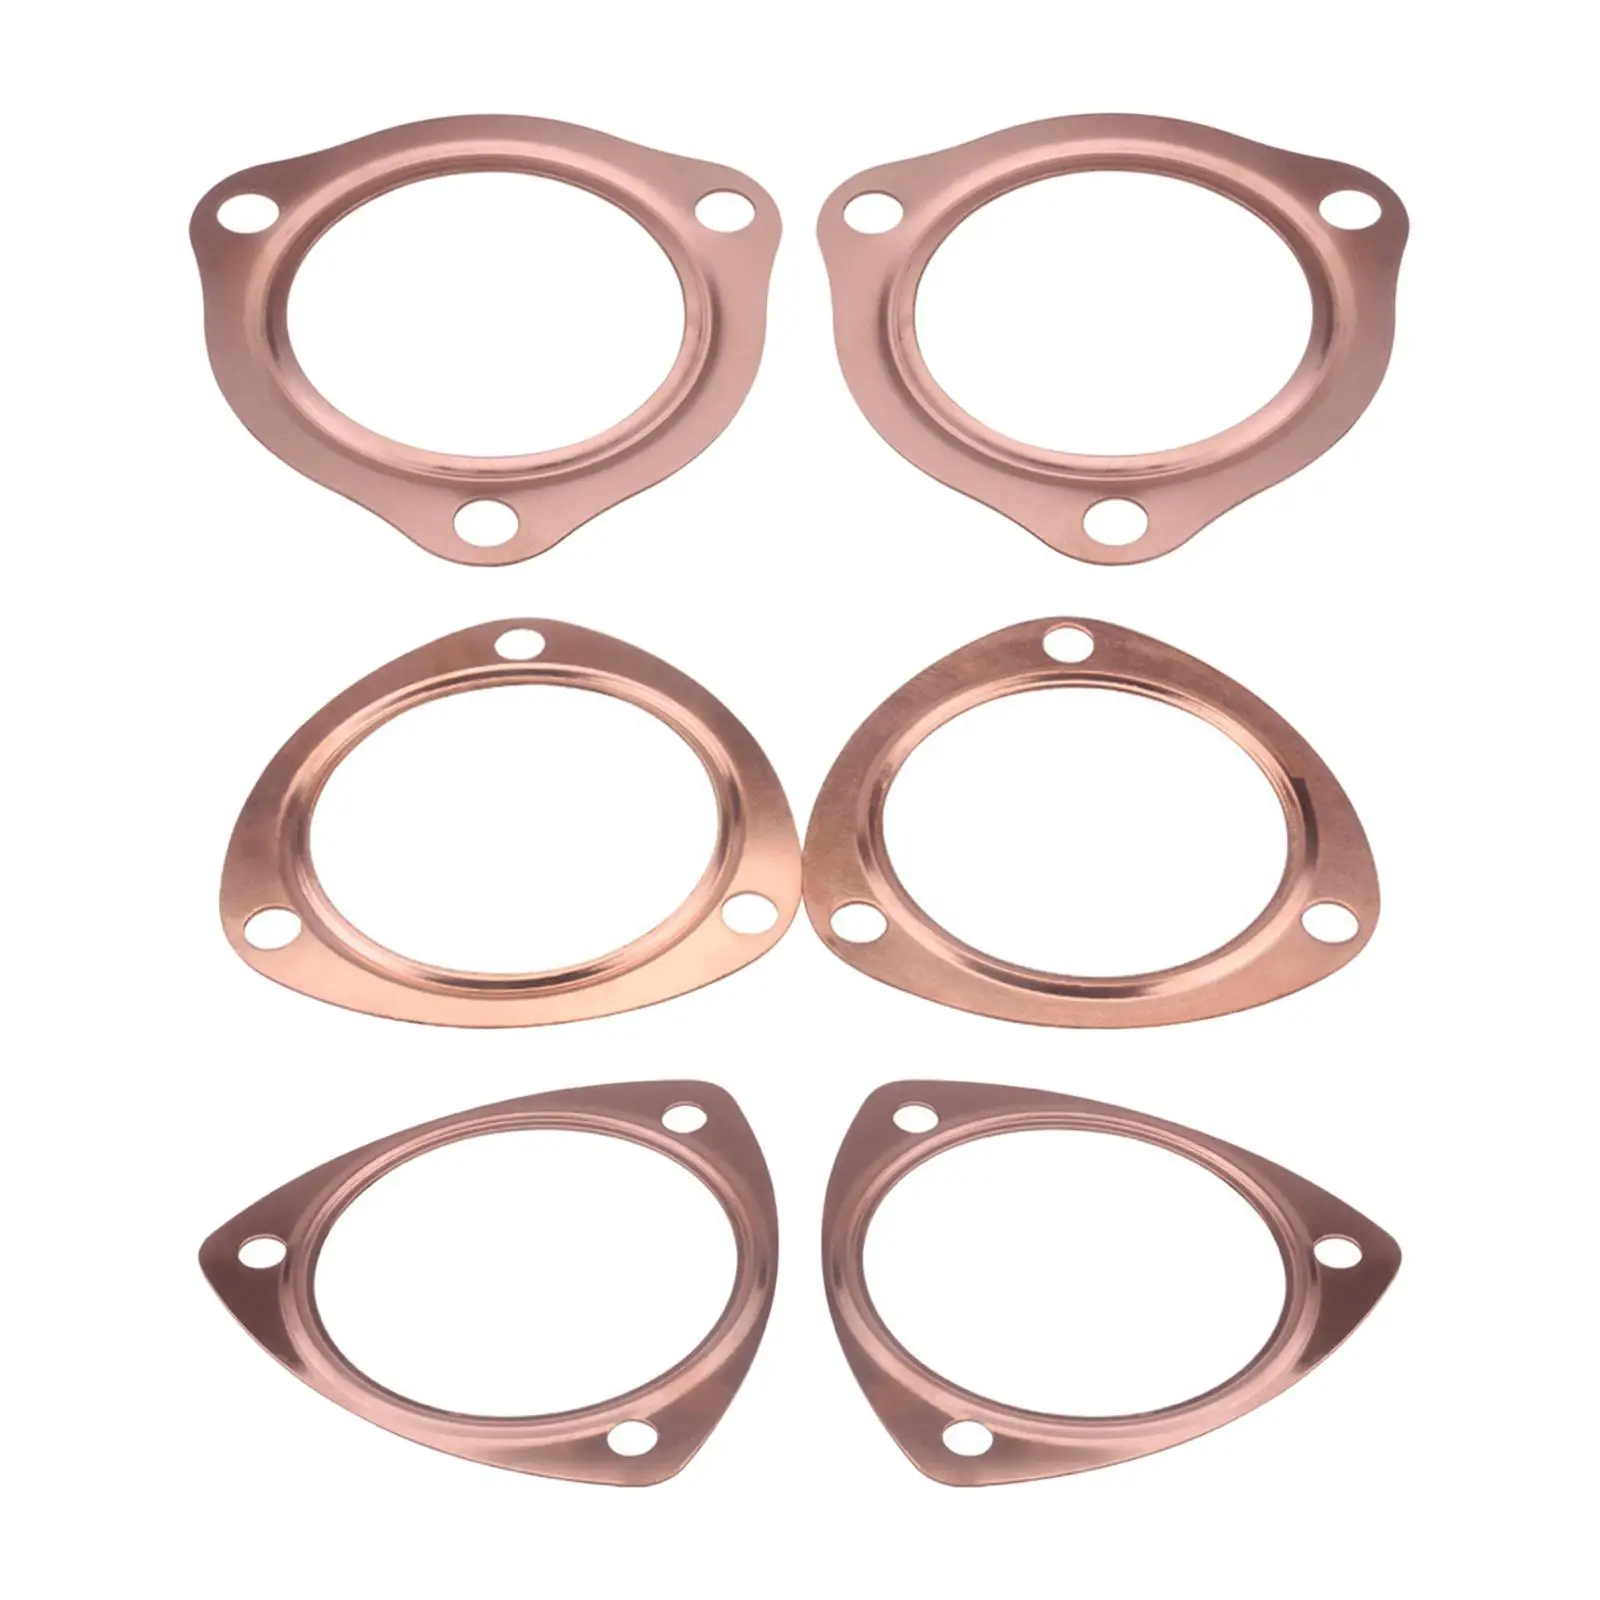 Copper Collector Gasket Copper Header Exhaust Collector Gaskets for Sbc Bbc 302 350 454